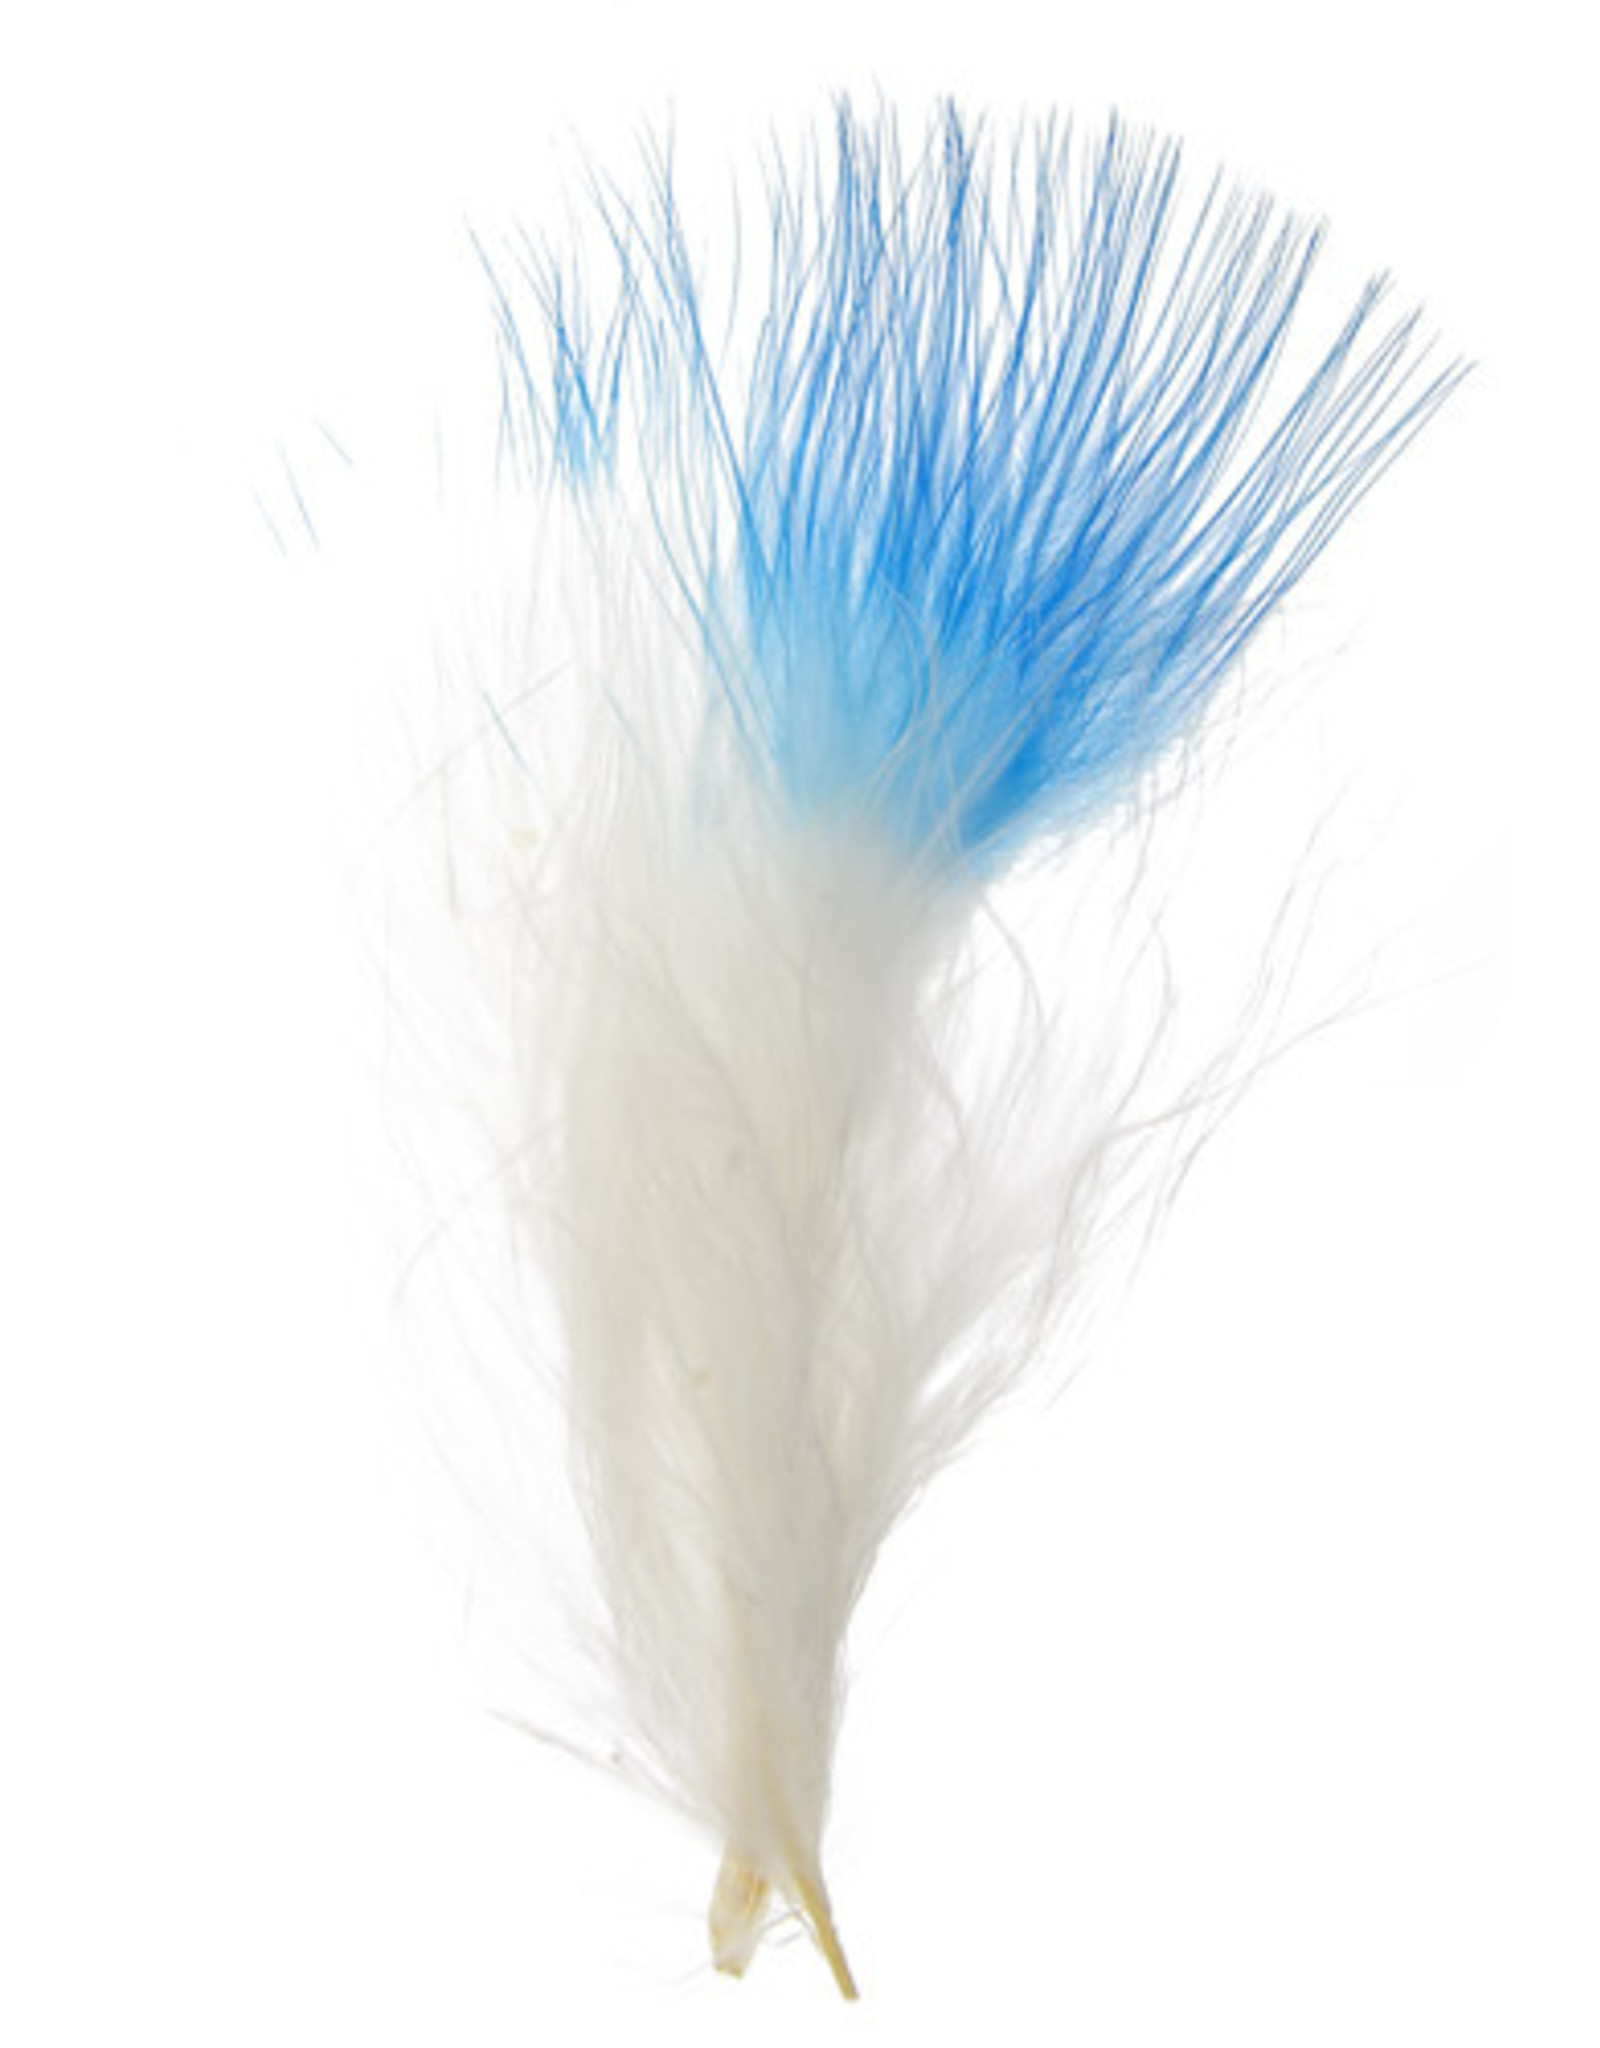 Marabou Feathers 4-6in White Turquoise Blue Tip  6g